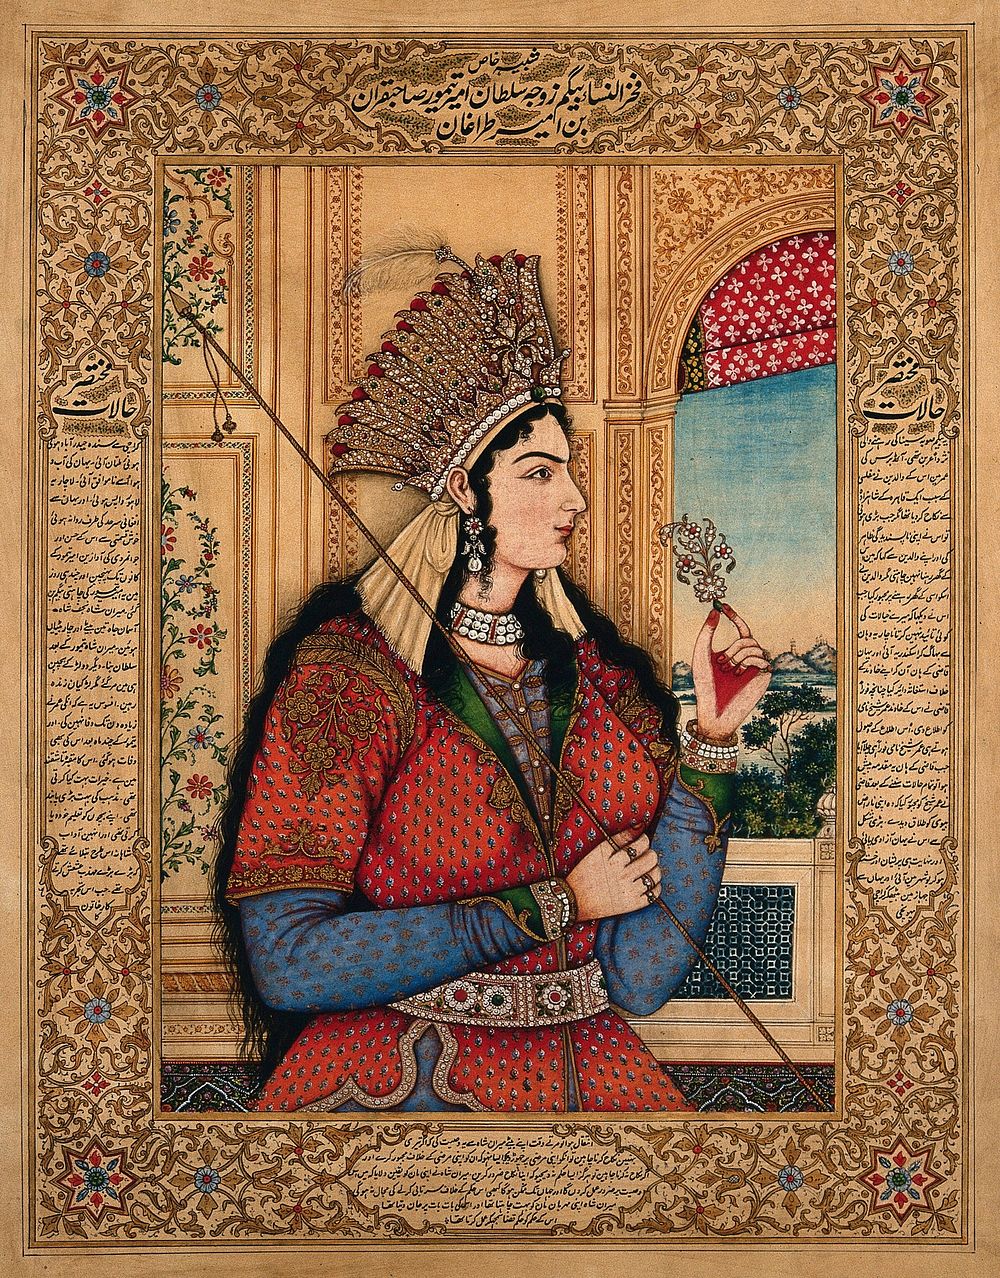 A Mughal empress or member of a royal family holding a spear and turban ornament. Gouache painting by an Indian painter.